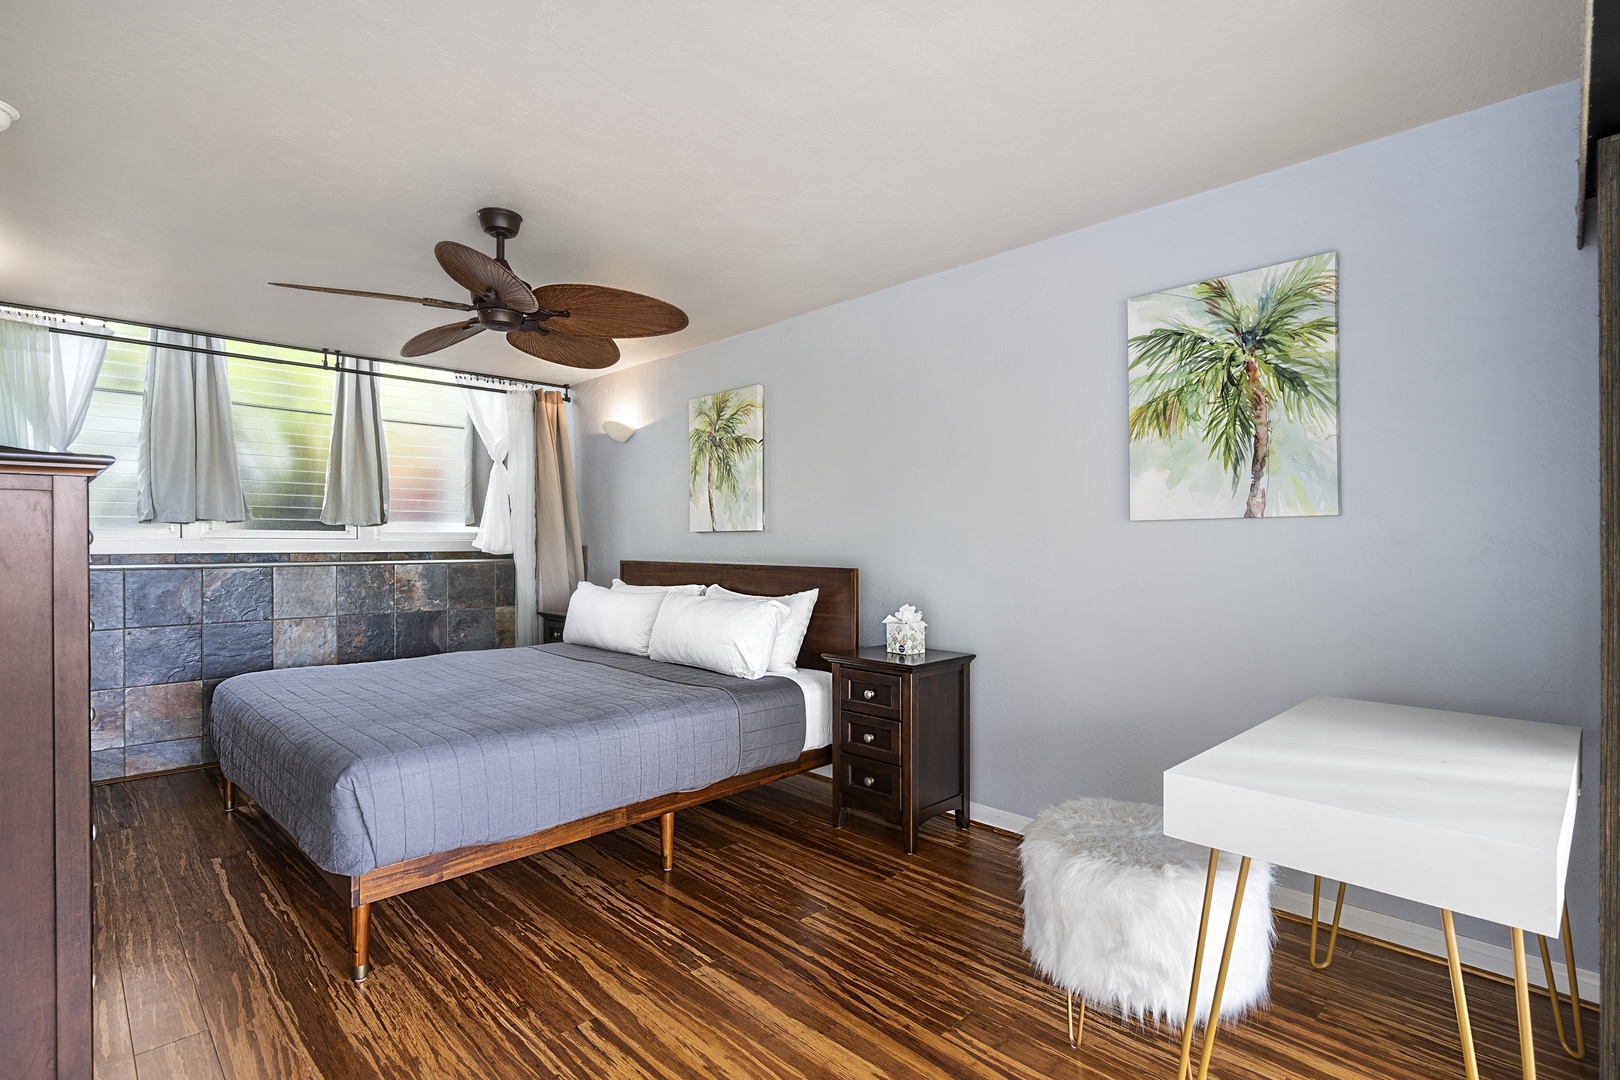 Kailua-Kona Vacation Rentals, Keauhou Resort 116 - Large bedroom equipped with work space